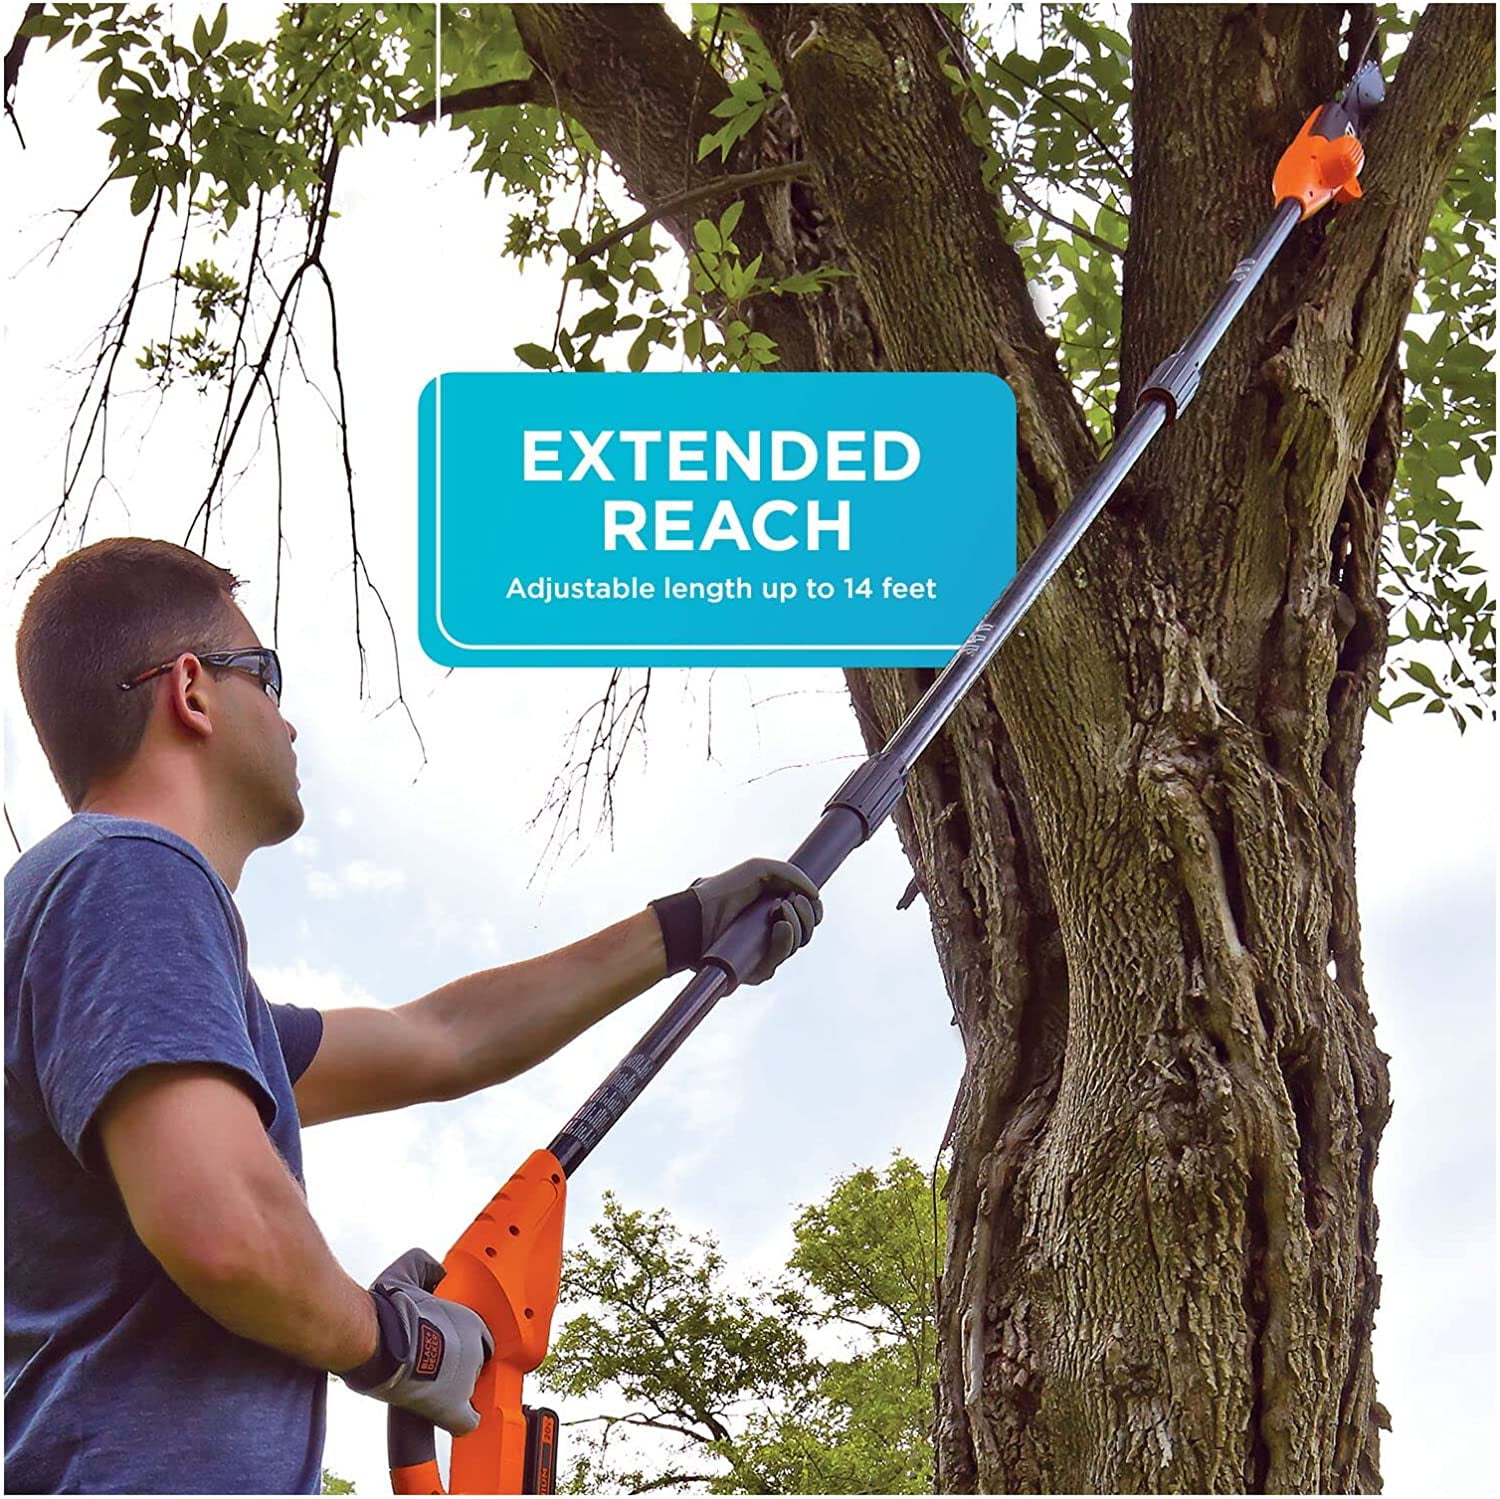 Visit the BLACK+DECKER Store 4.5 AAAAN 6,964 BLACK+DECKER 20V Max Pole Saw  for Tree Trimming, Cordless, with Extension up to 14 ft., Bare Tool Only (L  for Sale in Fort Lauderdale, FL 